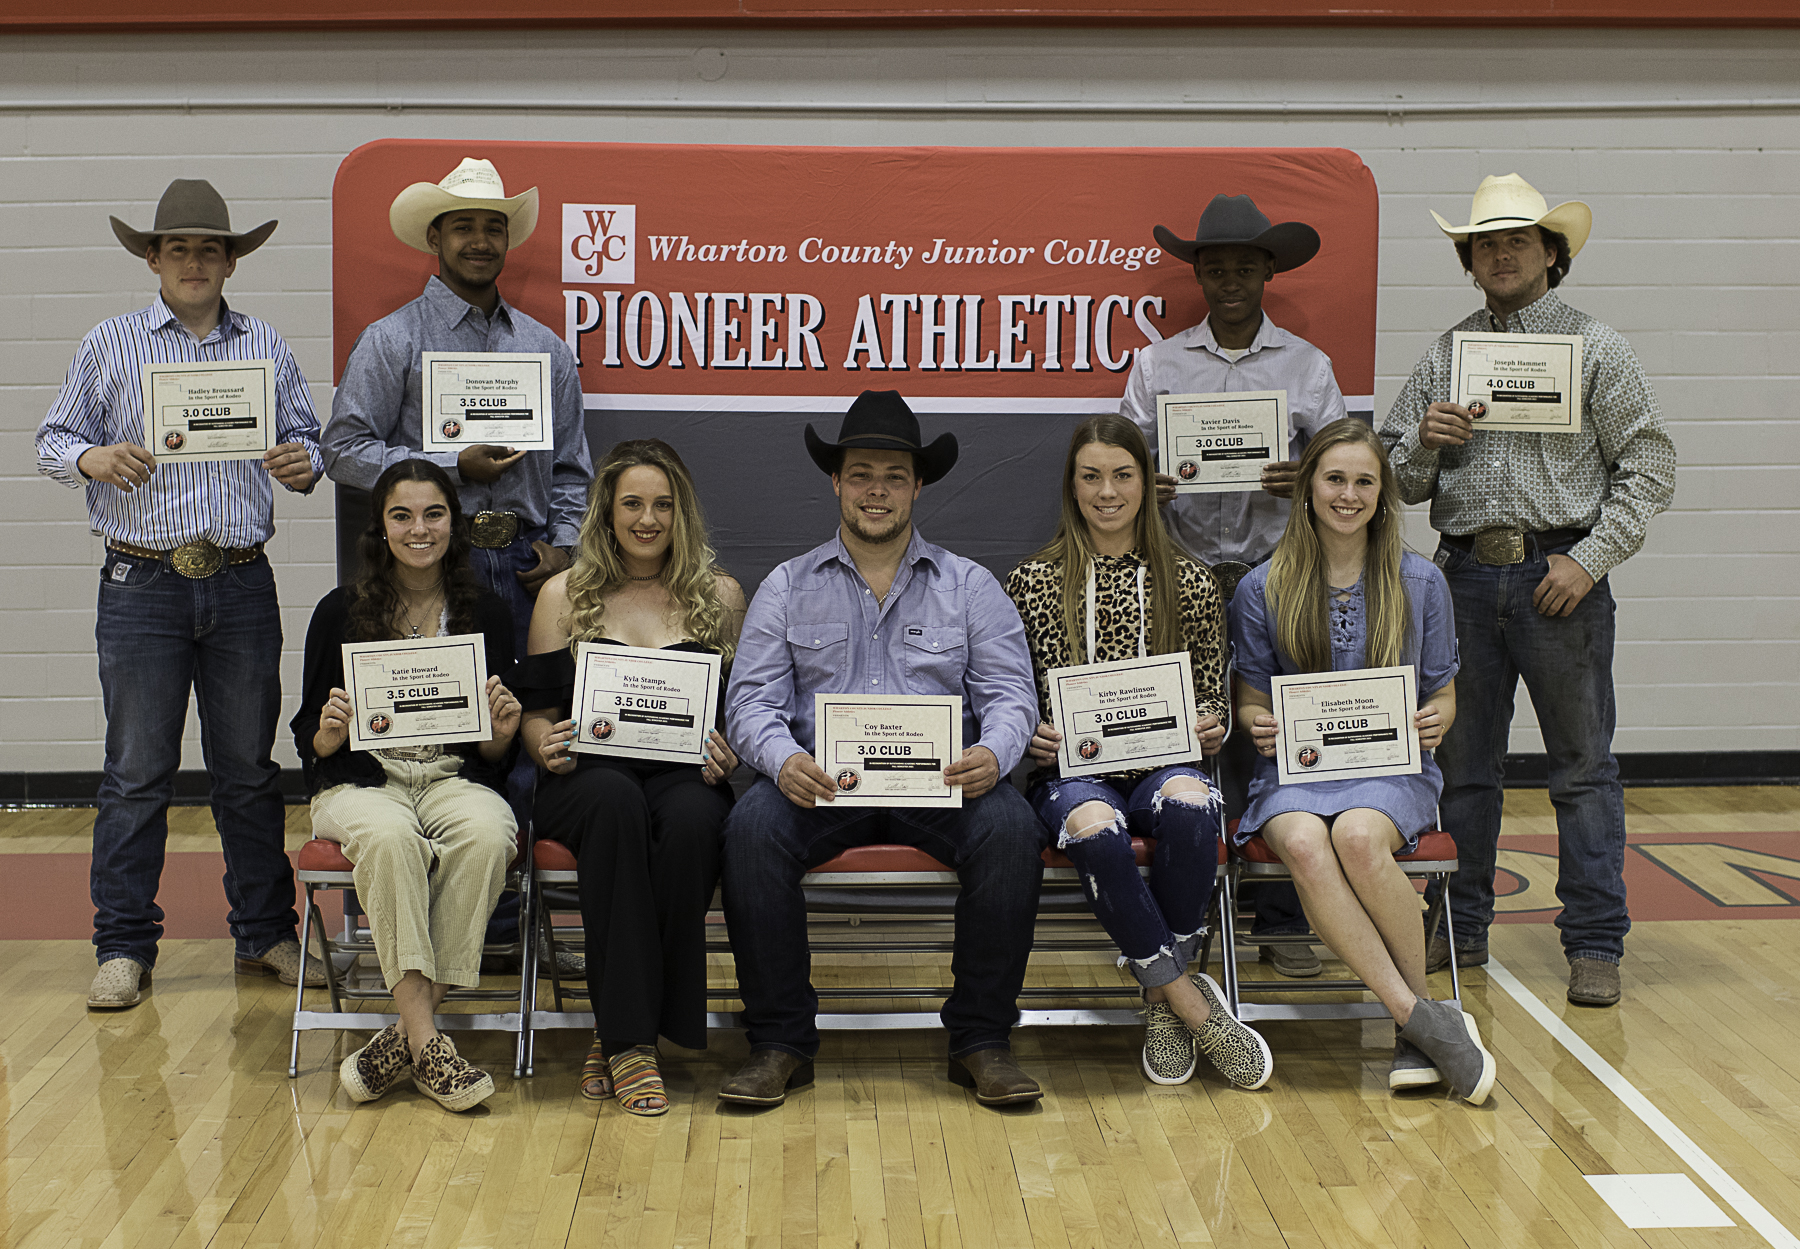 WCJC RODEO TEAM MEMBERS RECOGNIZED FOR ACADEMIC ACHIEVEMENT